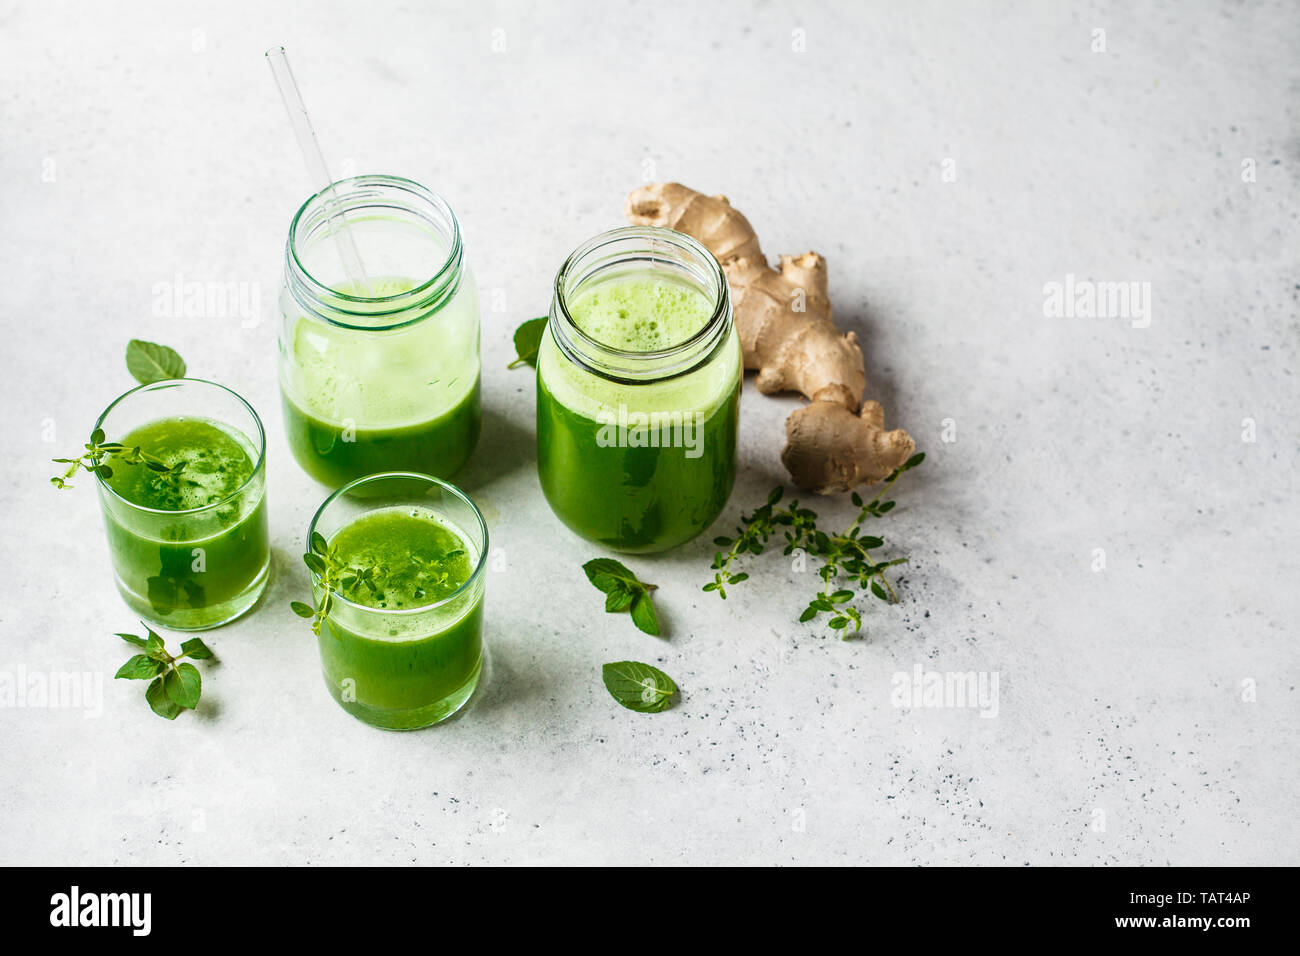 Green detox juice with ginger and mint in glasses and jars. Vegan detox concept. Stock Photo